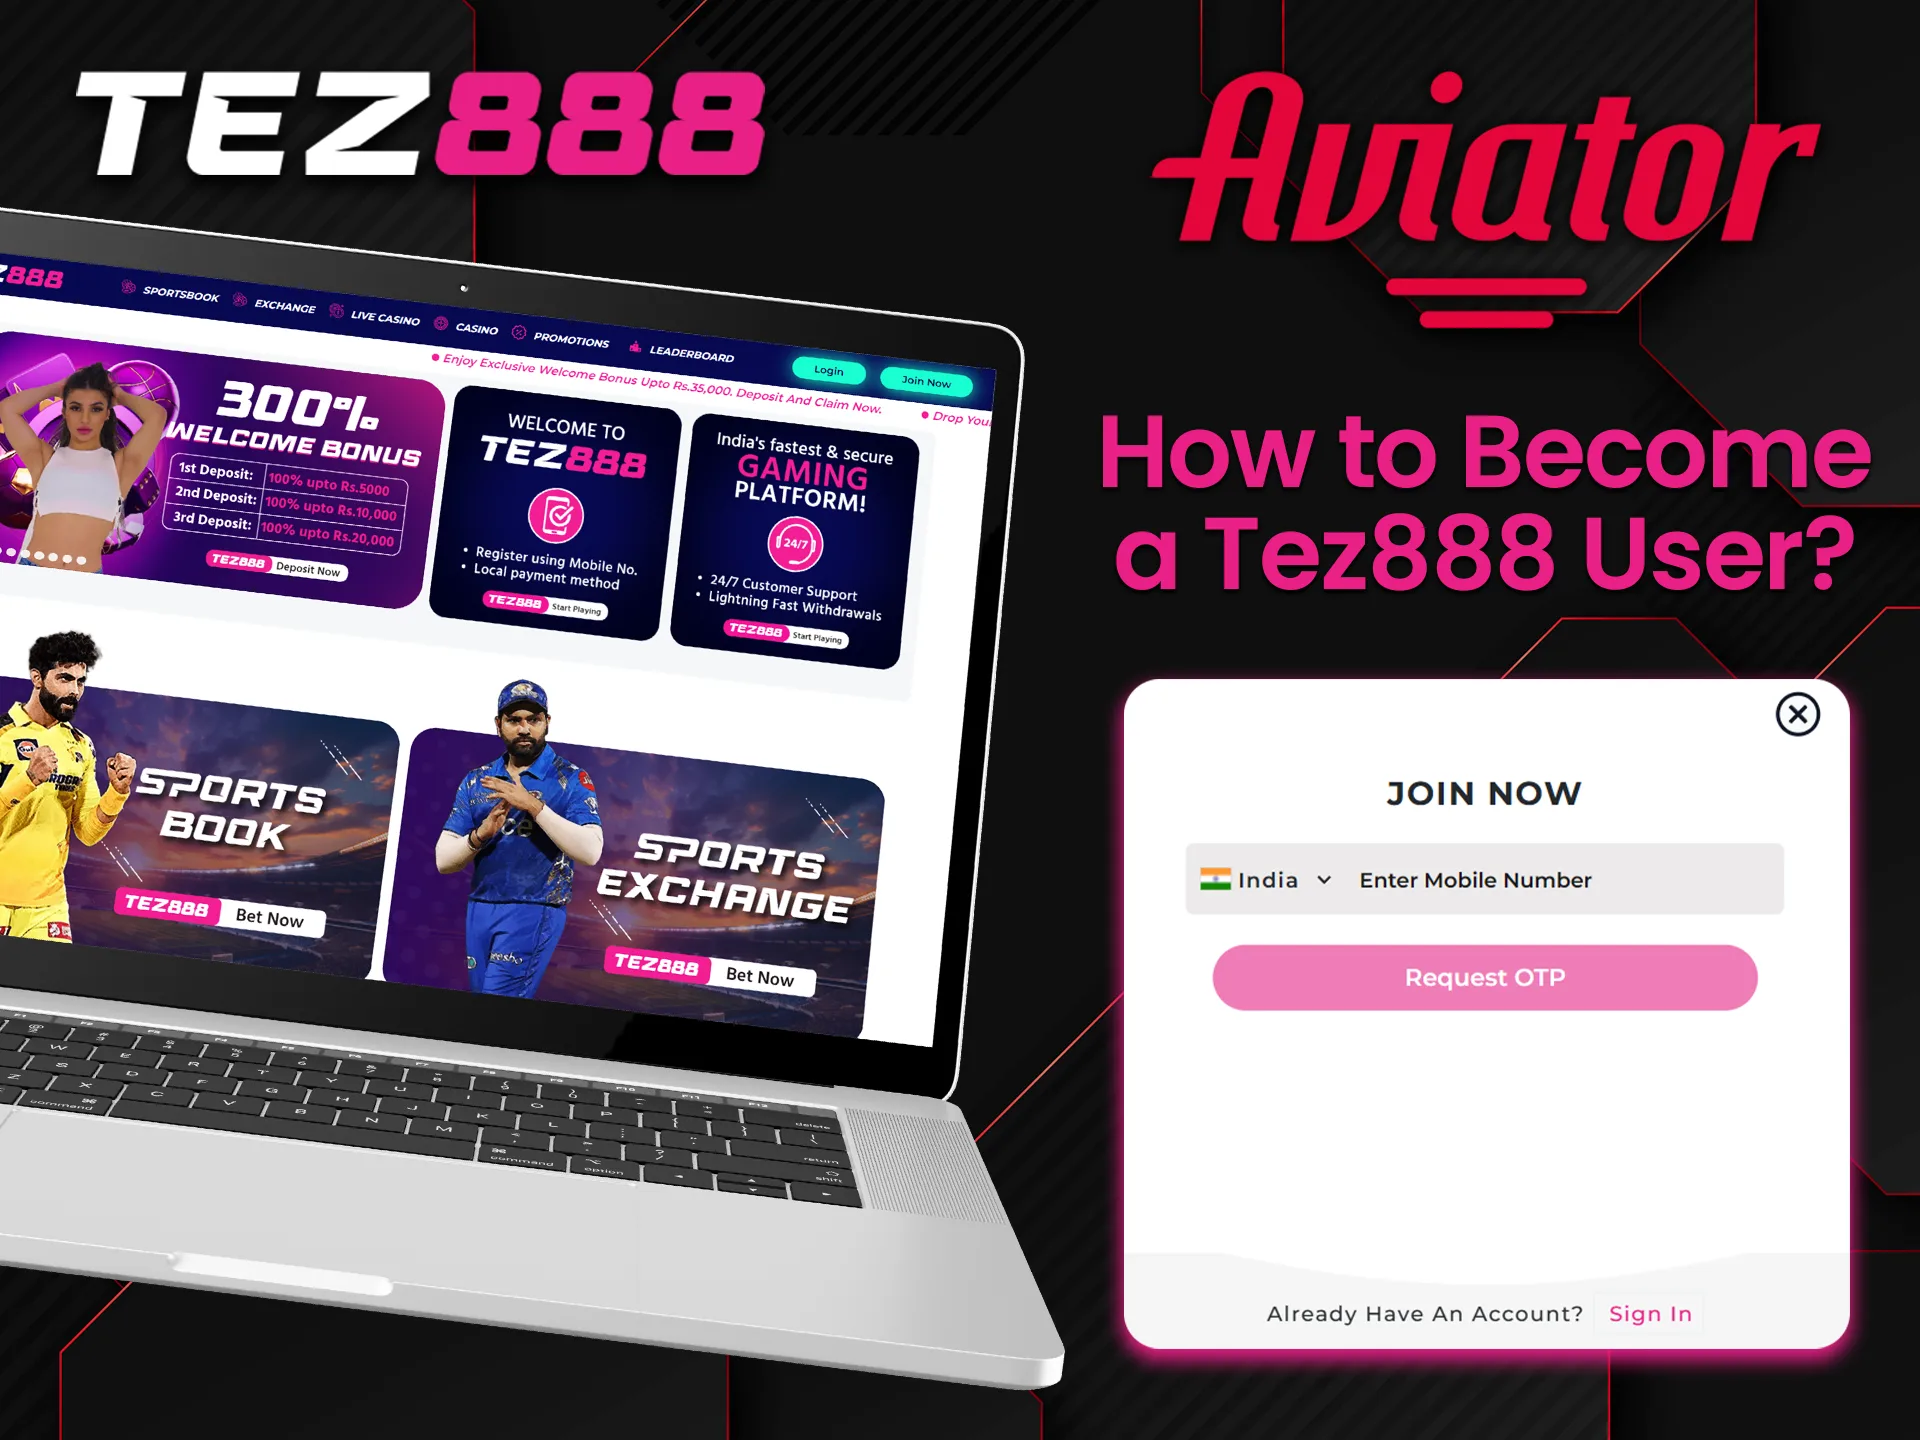 Open the official Tez888 page and register to play Aviator.